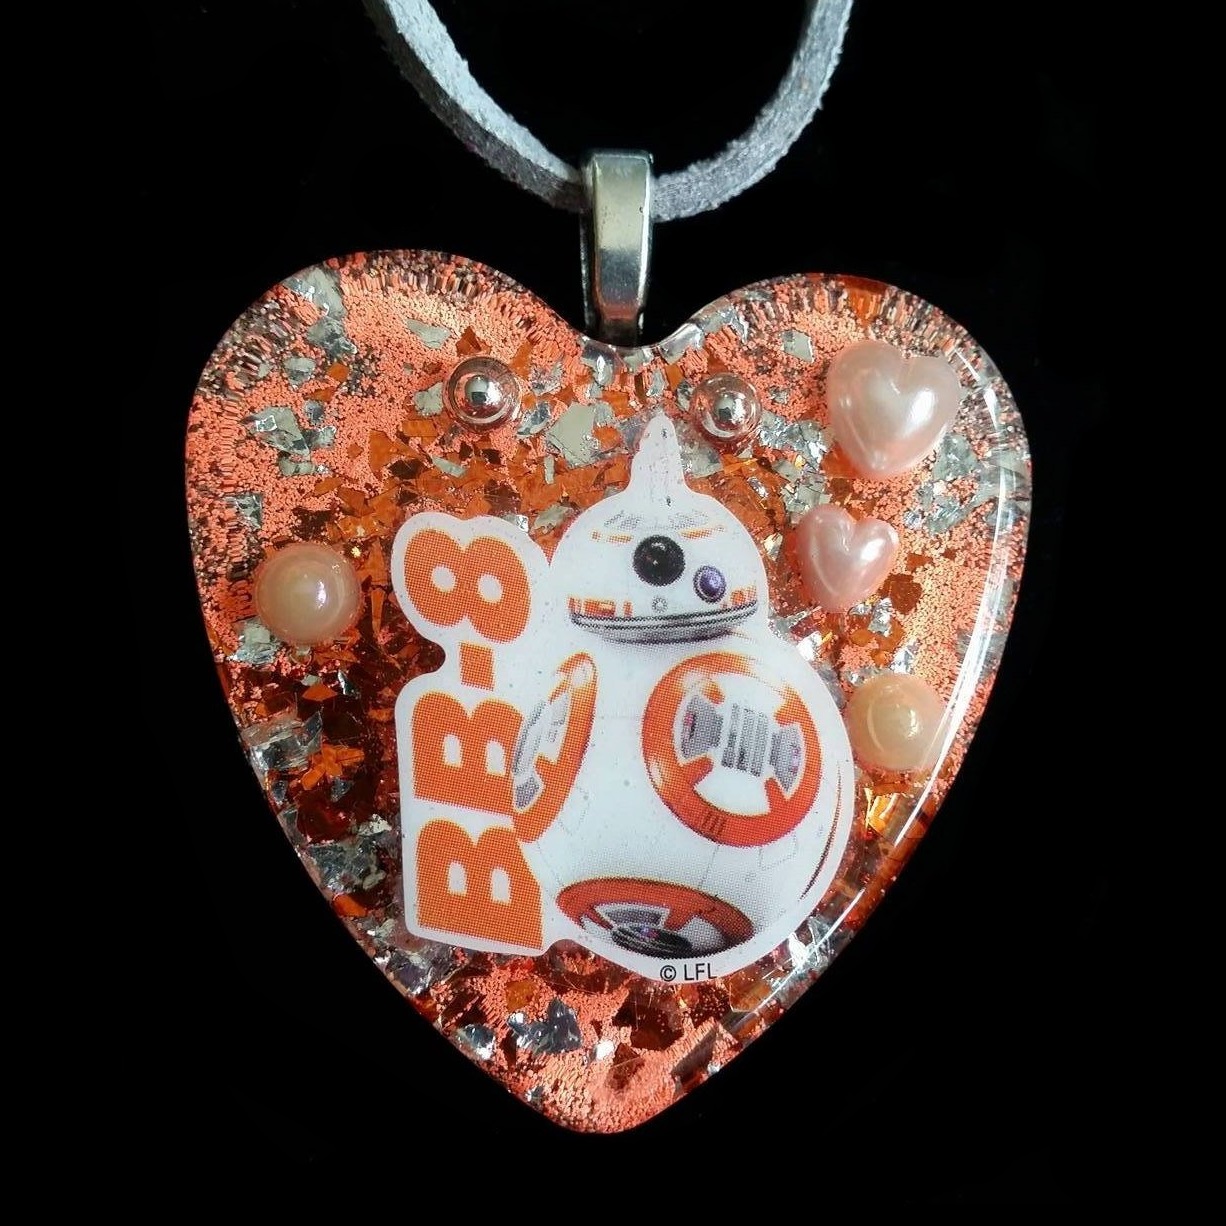 Star Wars Heart Shaped Necklace by Etsy Seller ChildishHeart